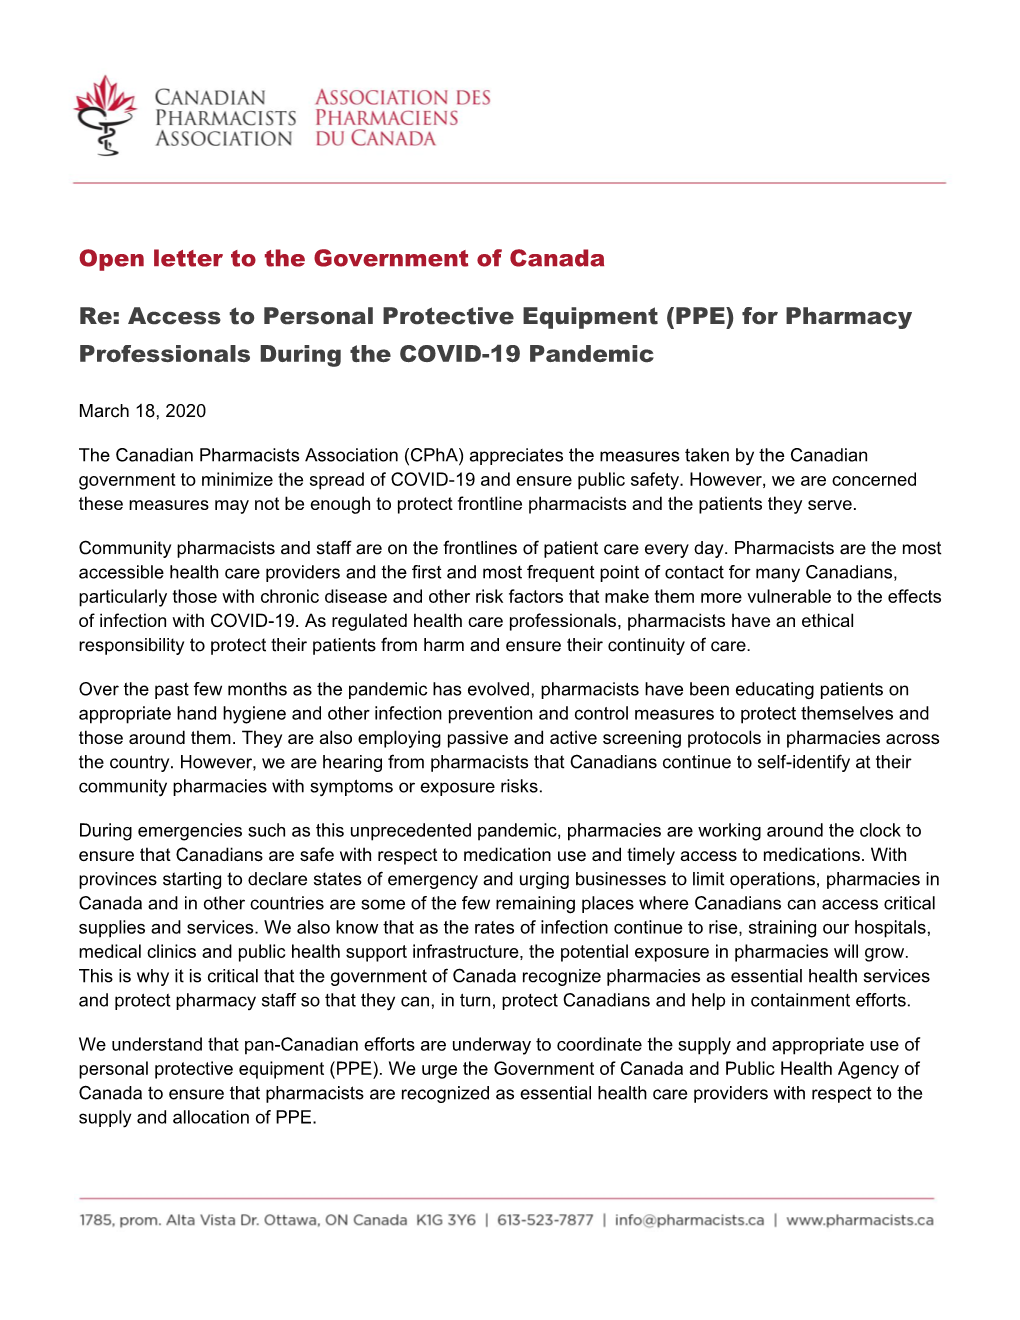 Access to Personal Protective Equipment (PPE) for Pharmacy Professionals During the COVID-19 Pandemic